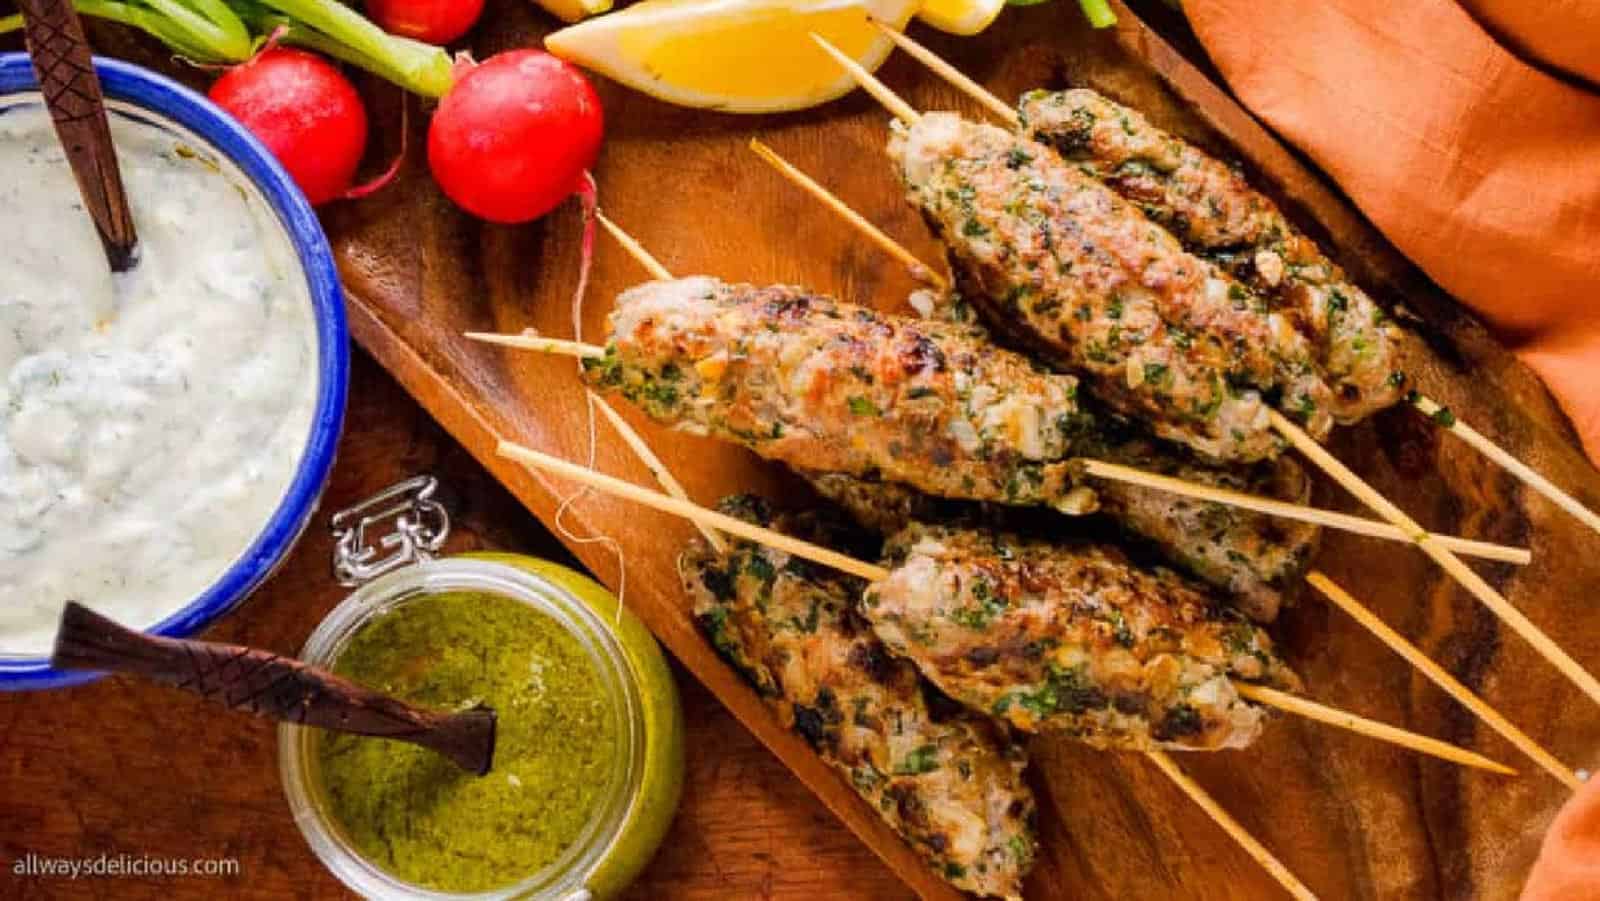 Lamb kofta kebabs on a wooden board with  fresh herbs and vegetables.